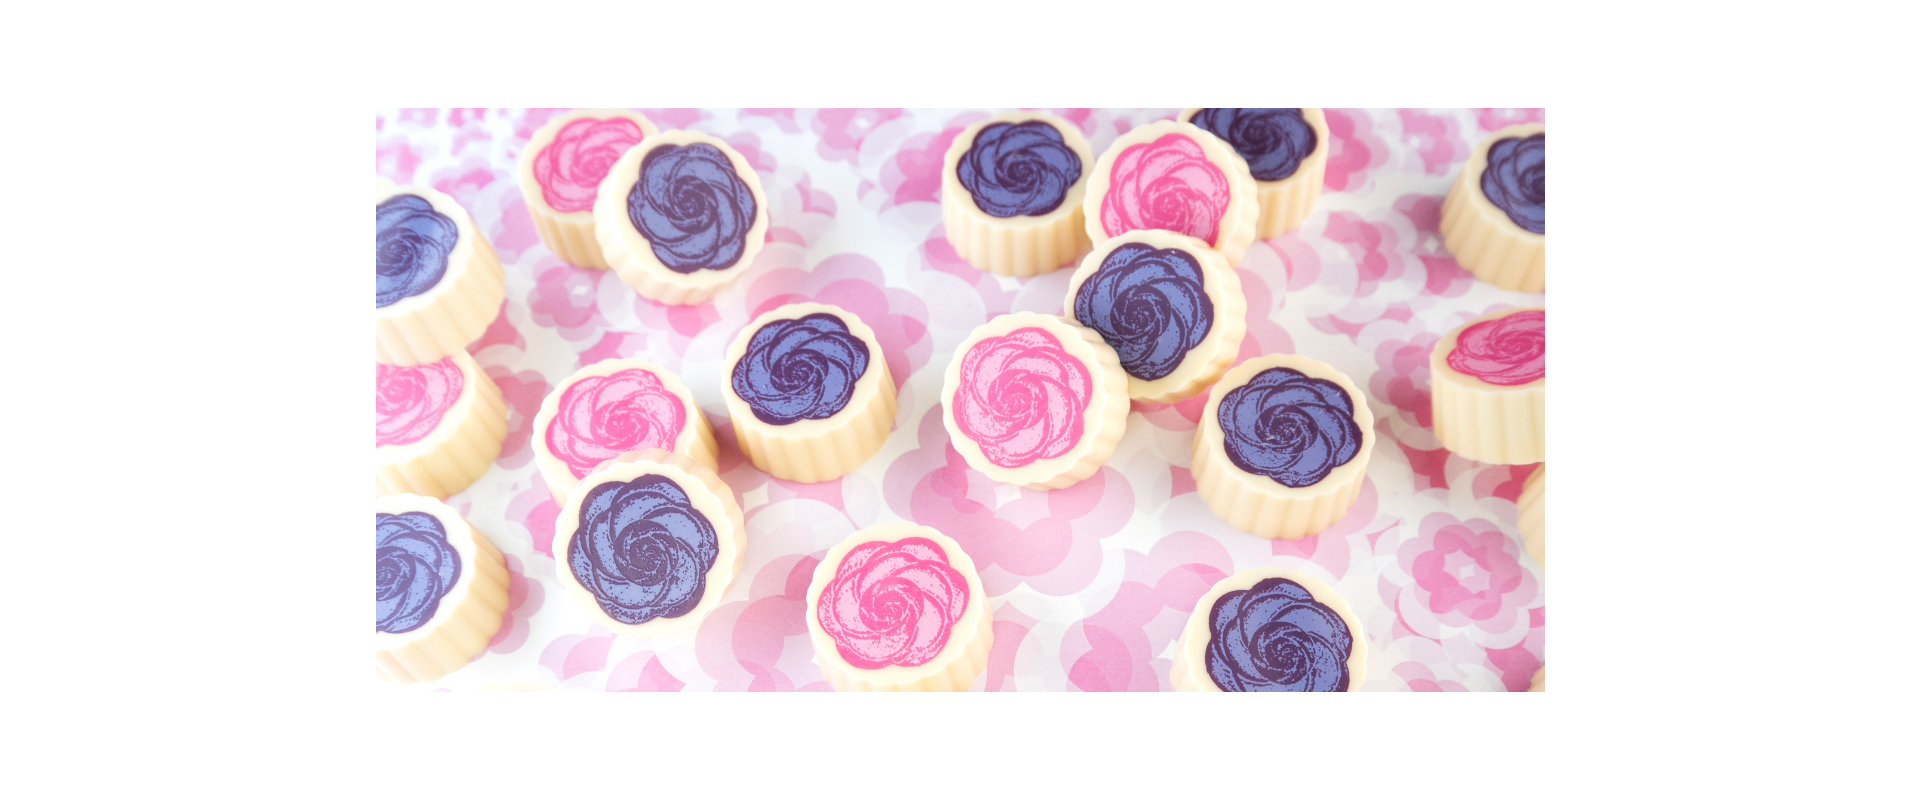 Mother's Day Chocolate Gifts — Rose & Violet